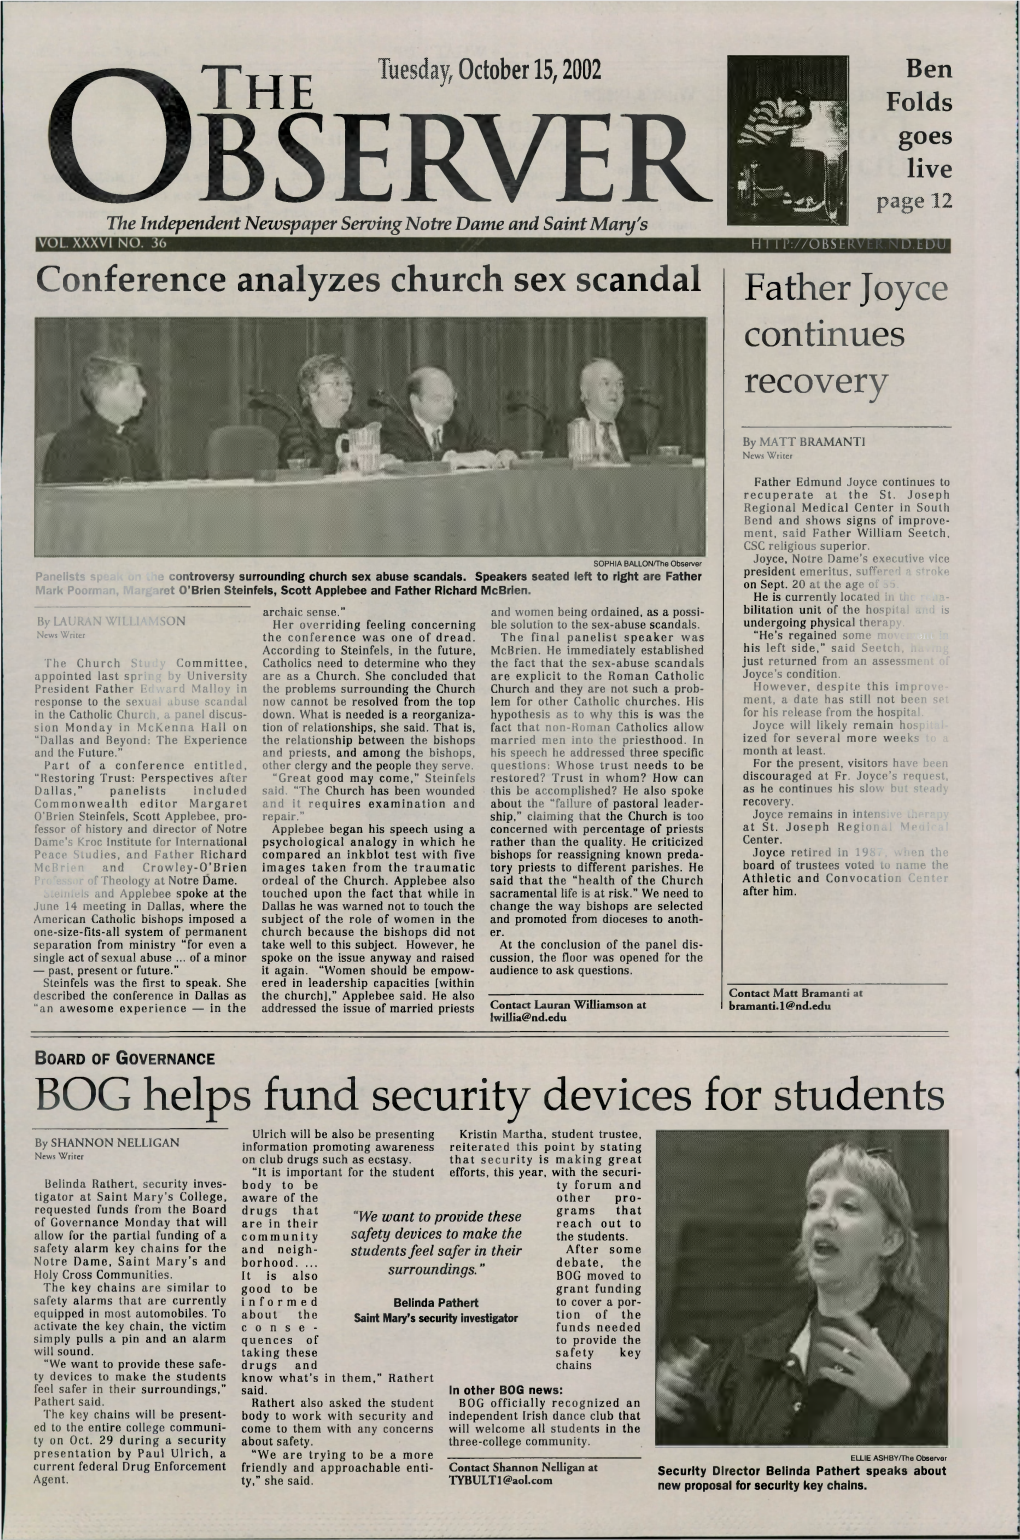 OBSERVER.ND.EDU Conference Analyzes Church Sex Scandalfather Joyce Continues Recovery